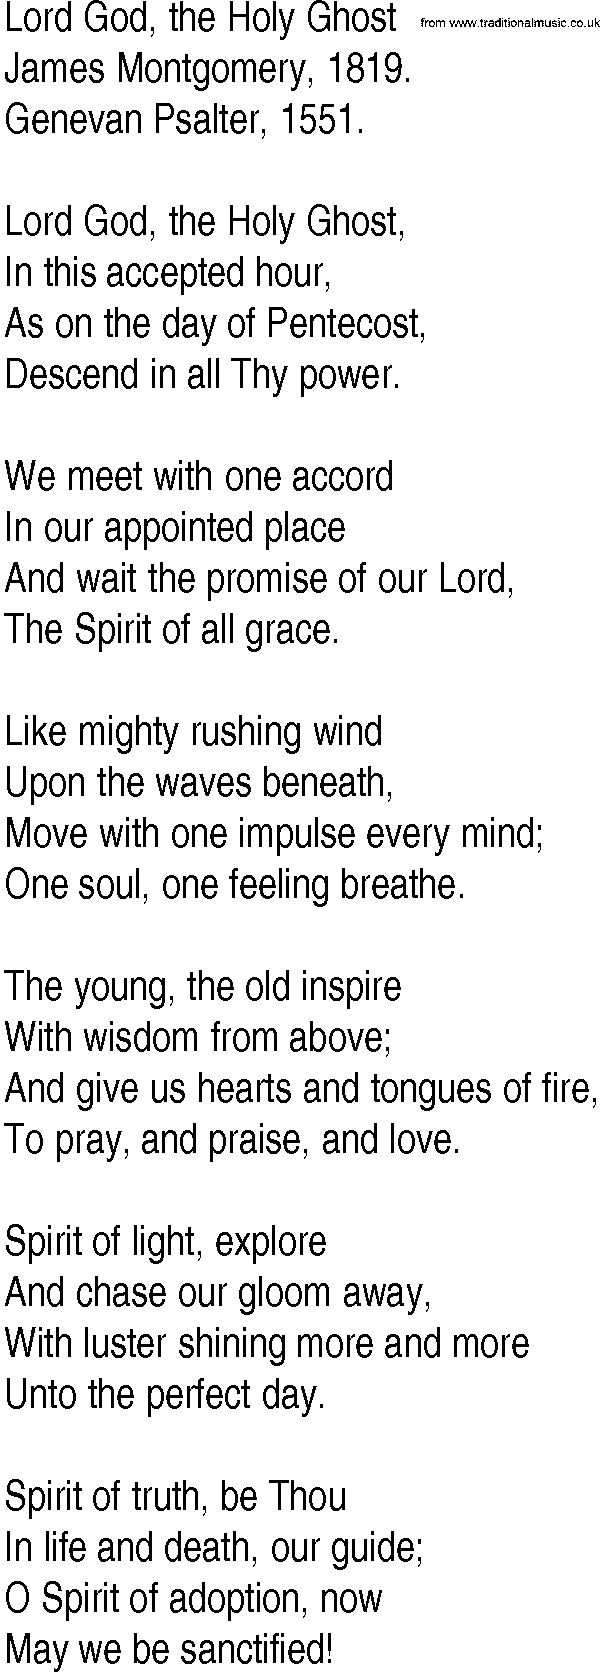 Hymn and Gospel Song: Lord God, the Holy Ghost by James Montgomery lyrics